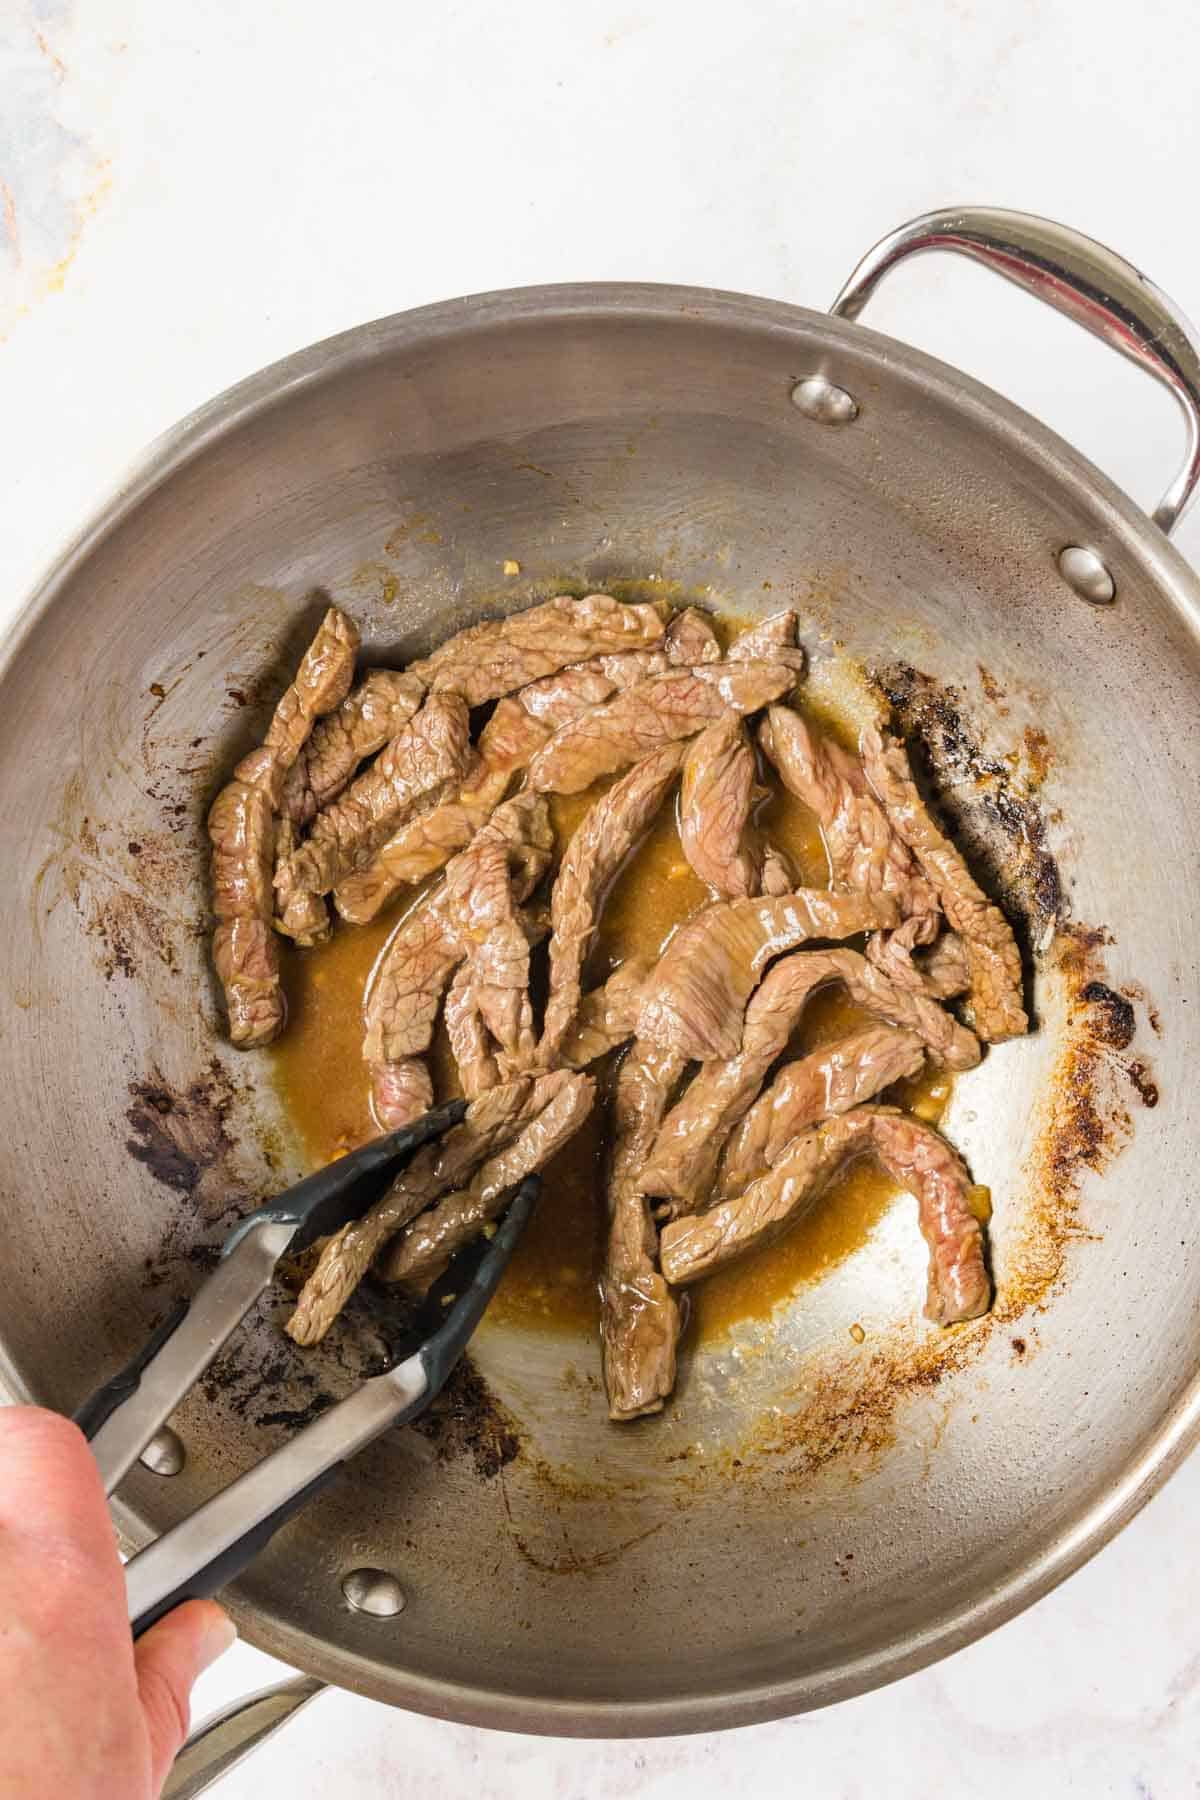 Browning the beef slices in a wok and turning them with tongs.